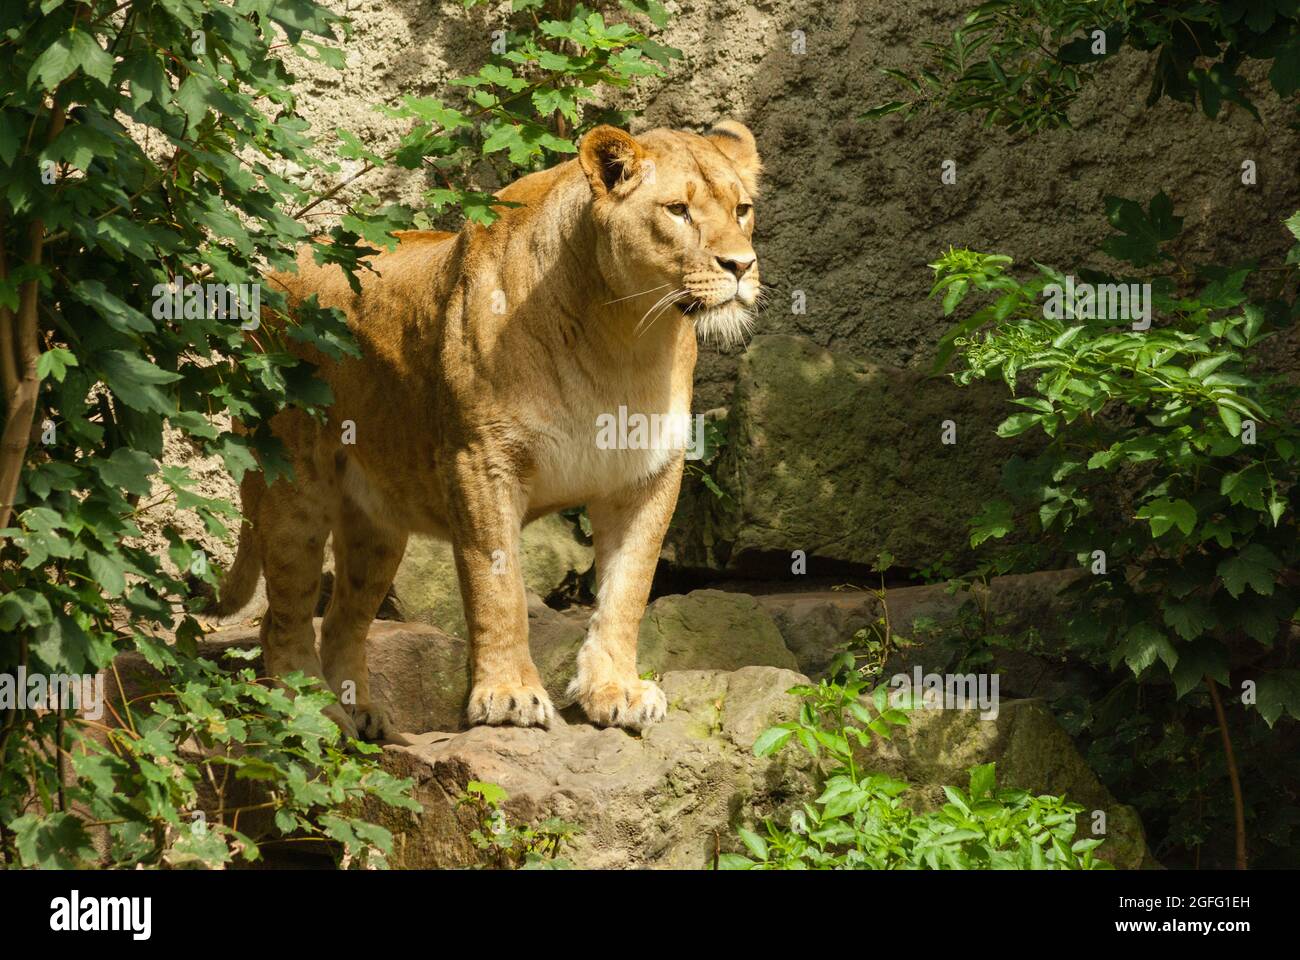 Lioness standing on a rock surrounded by greenery, staring in the distance. The alert attitude of a focused fighter. Stock Photo